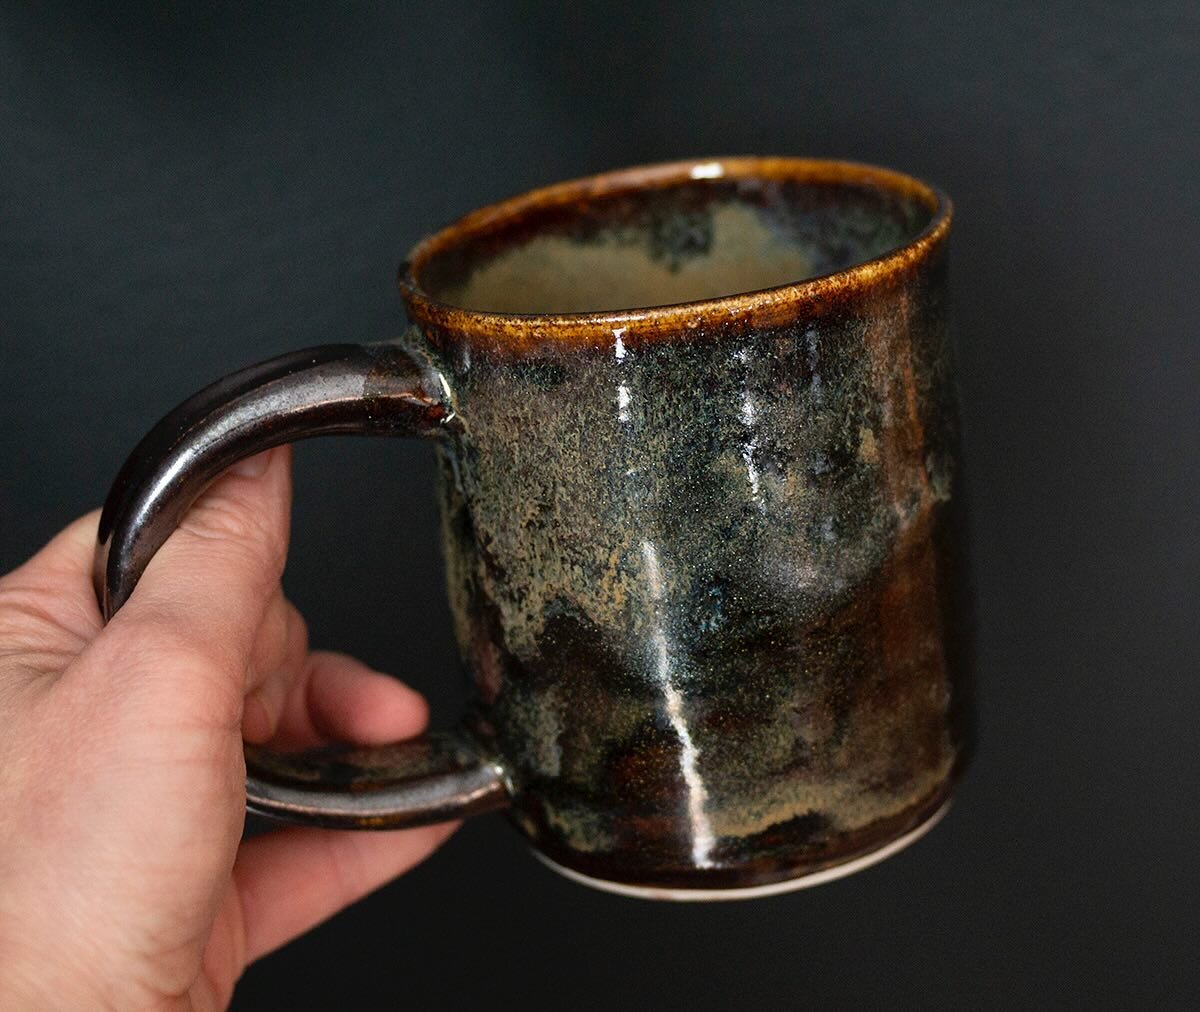 I call this one the Cosmic Mug. It&rsquo;s a bit sparkly ✨. Available now in my Etsy store #cosmic #throwingpots #coffeemug #sparkles